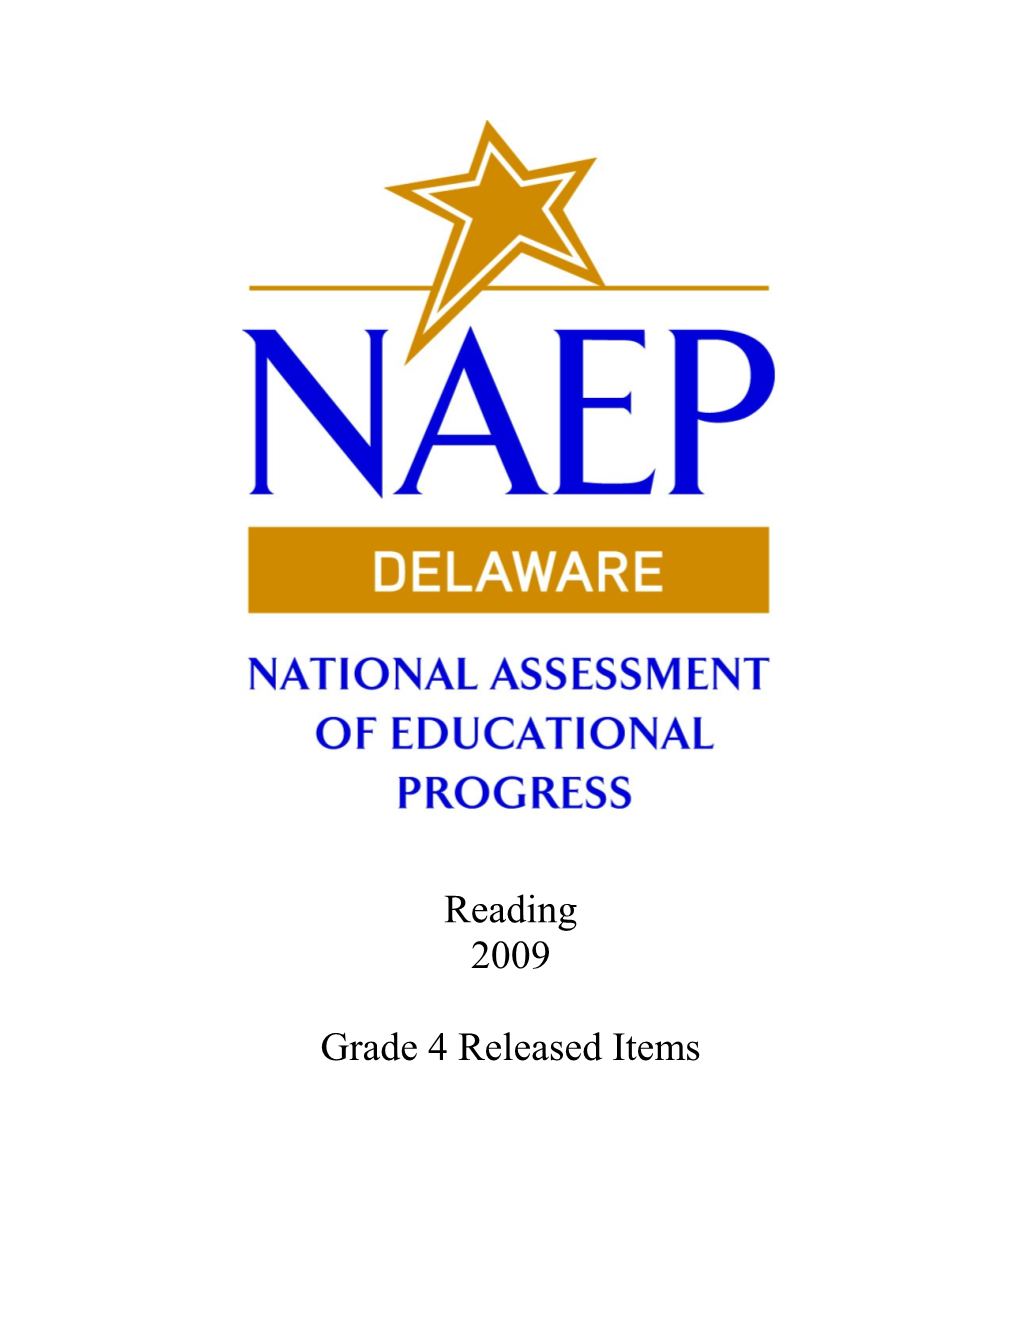 NAEP 2009 Reading Grade 4 Released Items